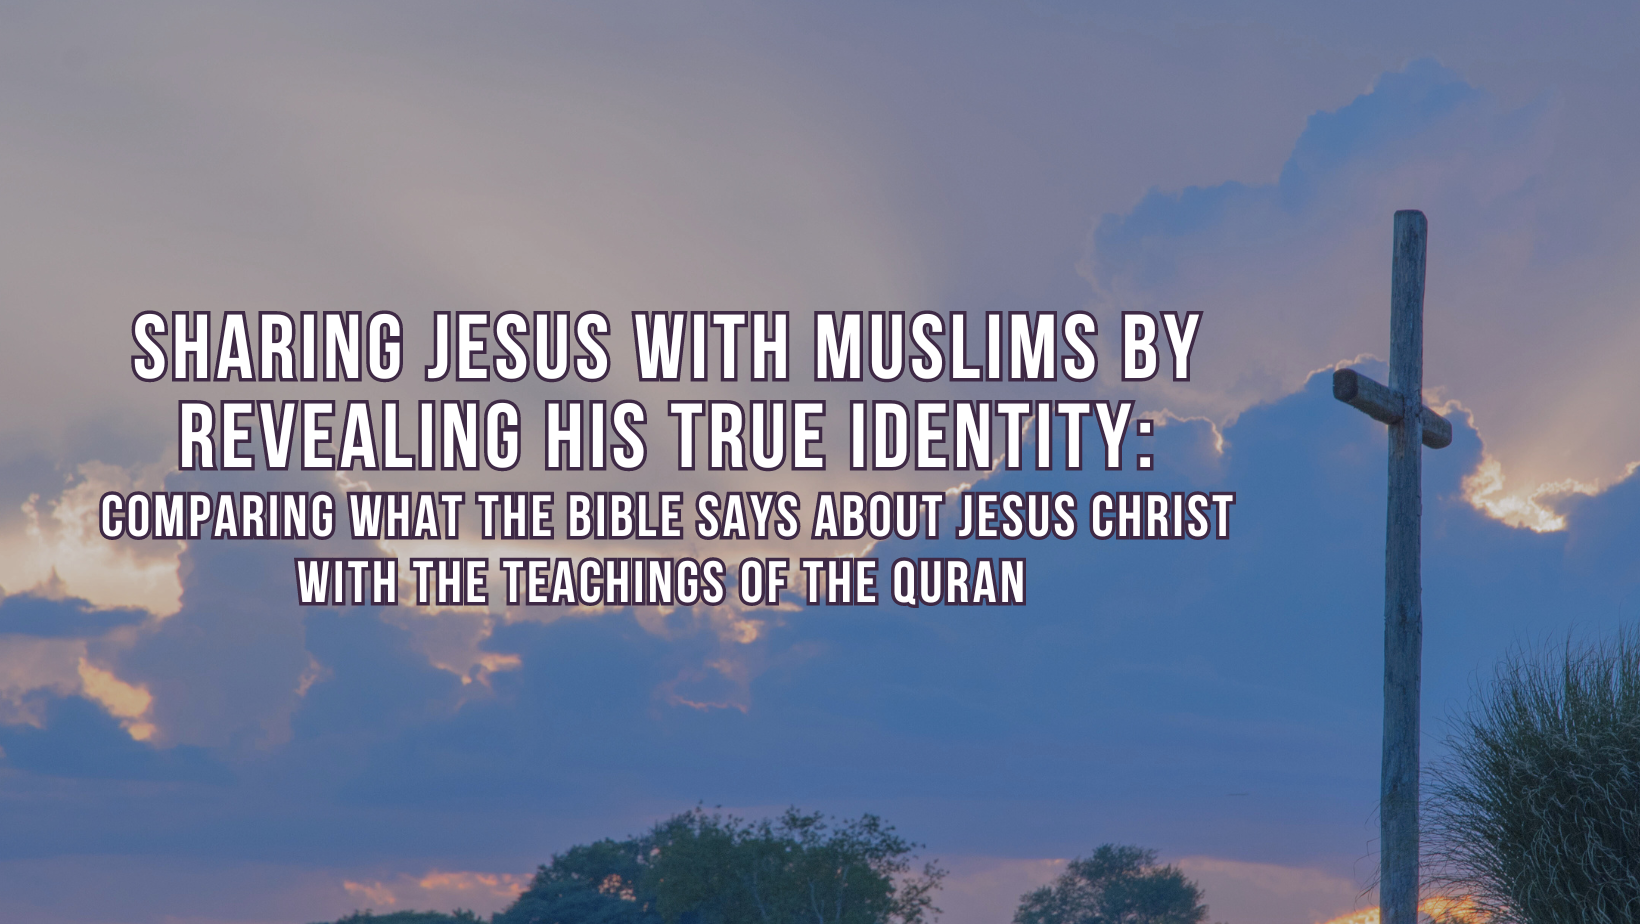 Sharing Jesus with Muslims by revealing His true identity: Comparing what the Bible says about Jesus Christ with the teachings of the Quran 